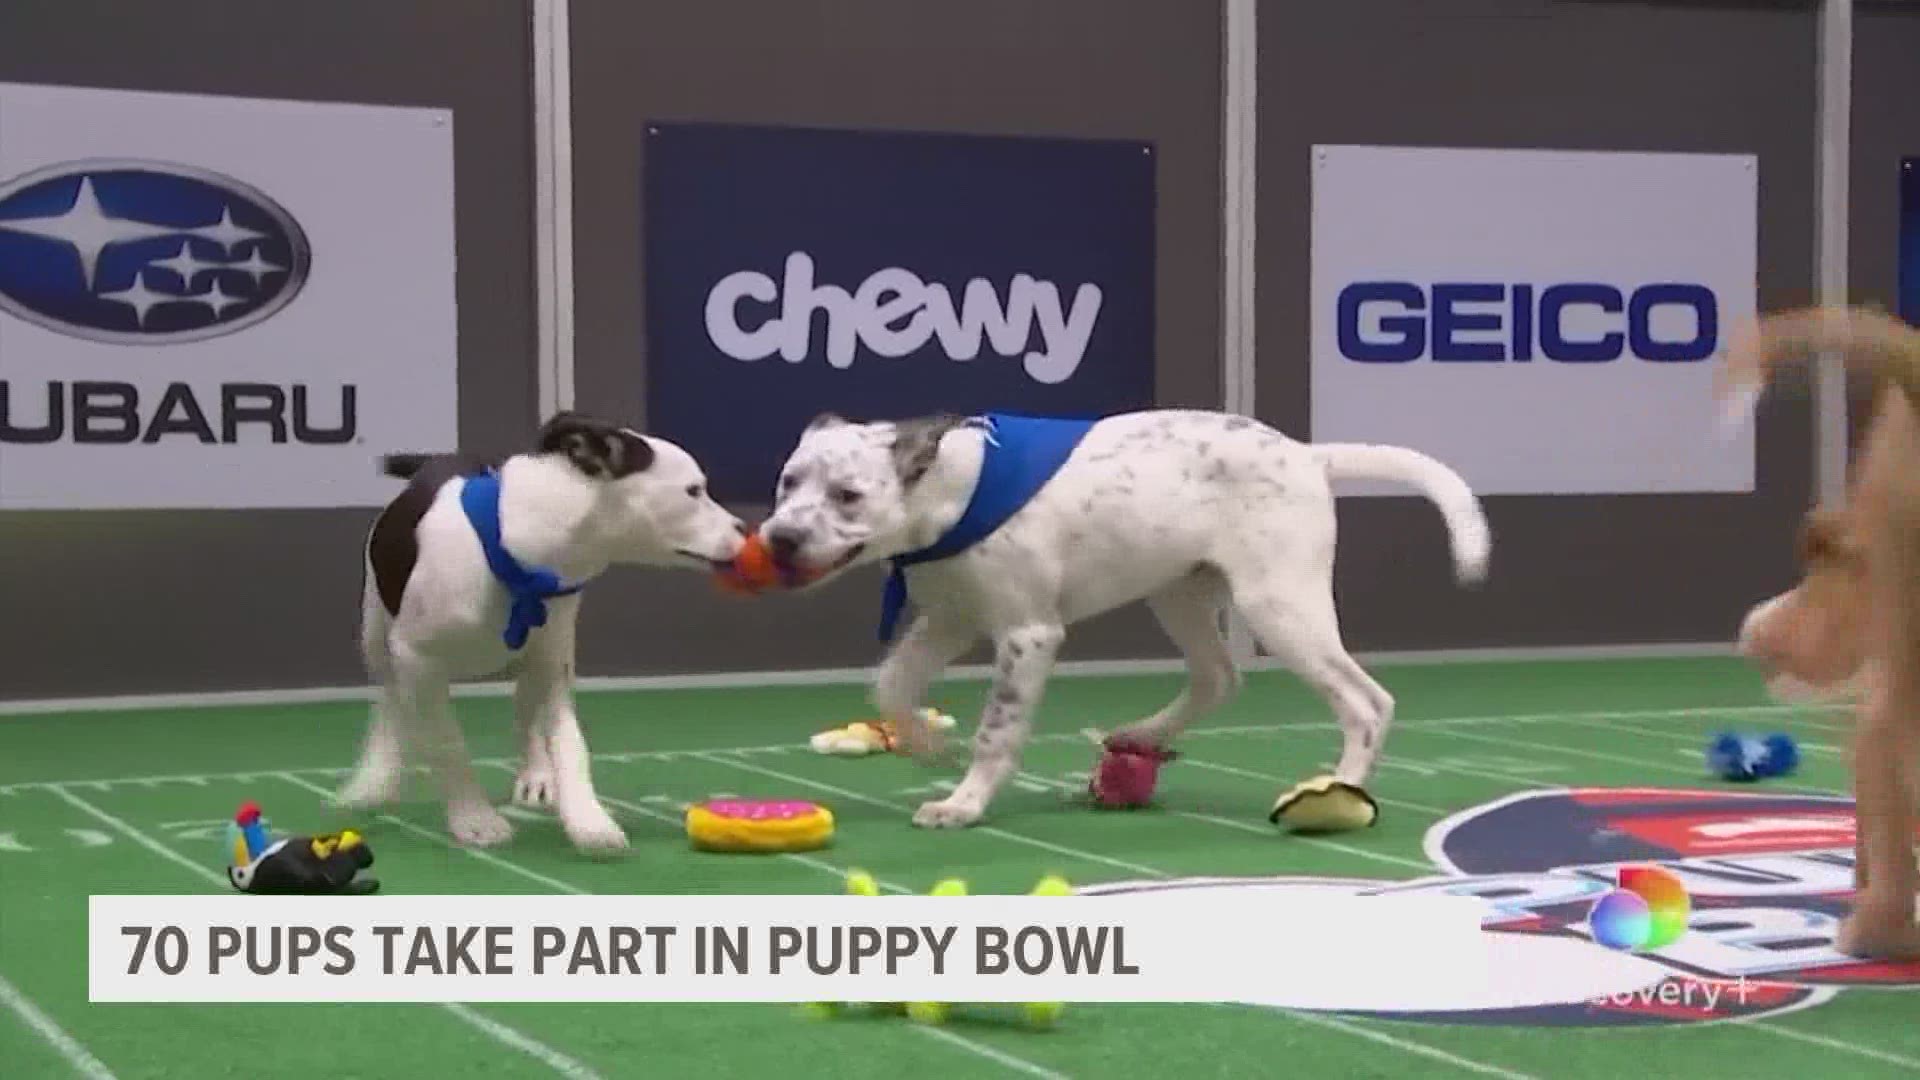 The Puppy Bowl is coming up and Iowa has it's own dog in the game.